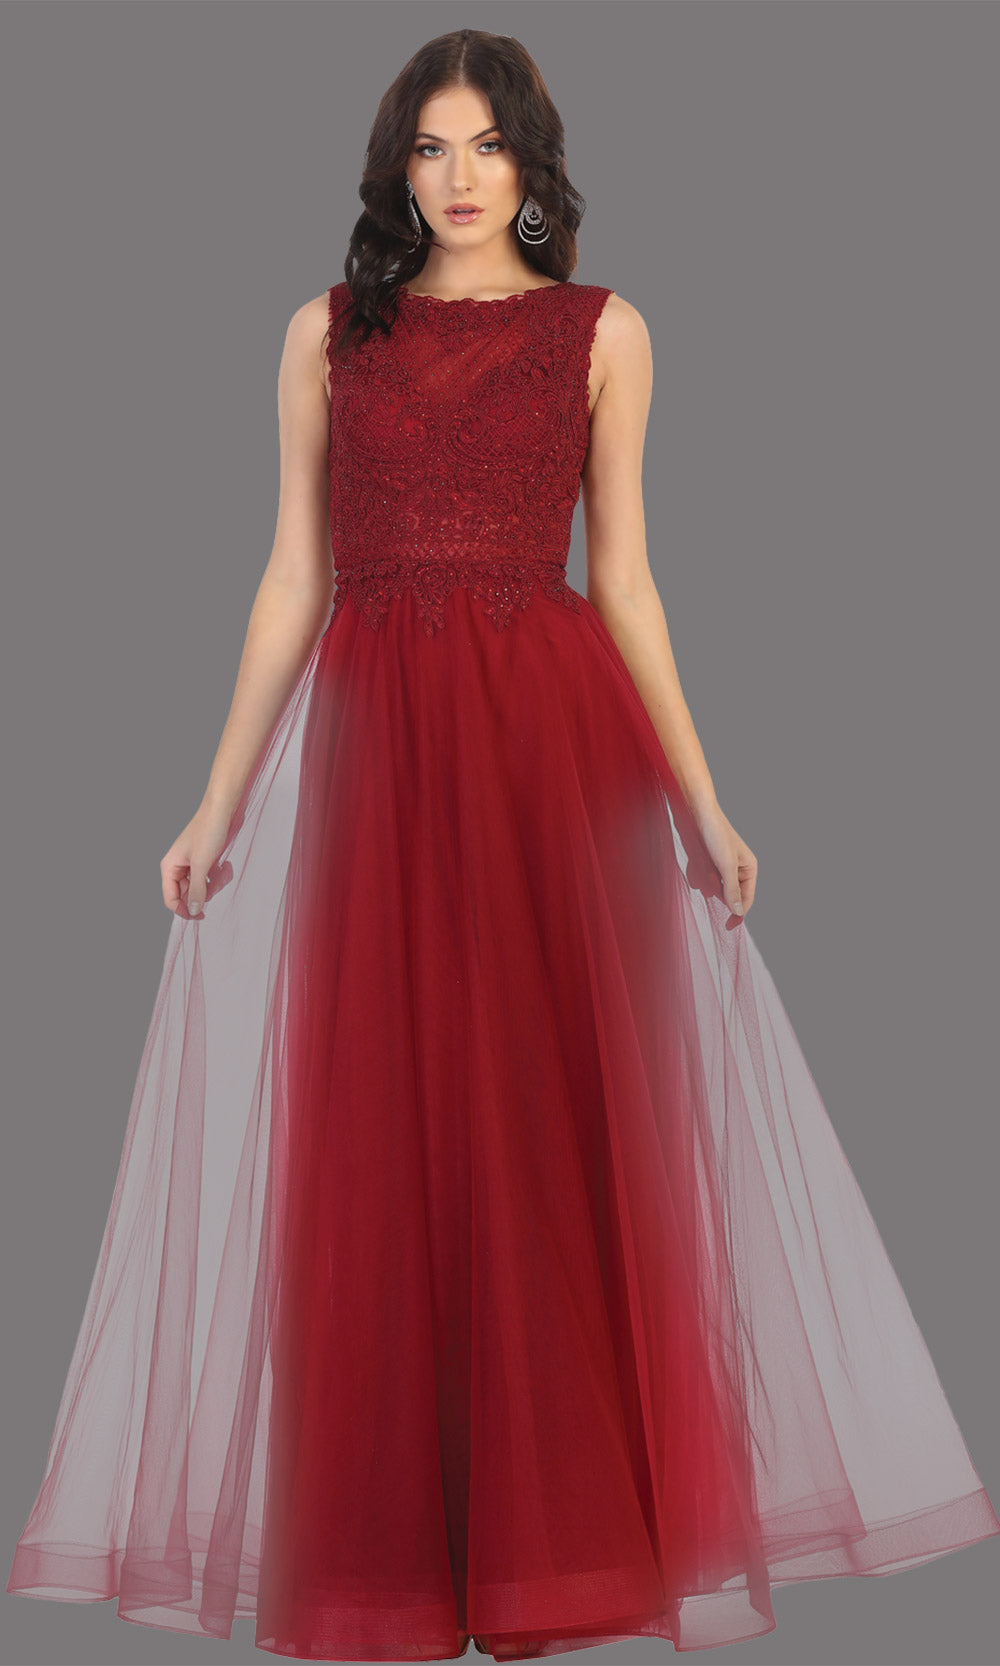 Mayqueen MQ1717 long burgundy red flowy dress with high neck & high back. This dark red dress is perfect for bridesmaid dresses, simple wedding guest dress, prom dress, gala, black tie wedding. Plus sizes are available, evening party dress.jpg